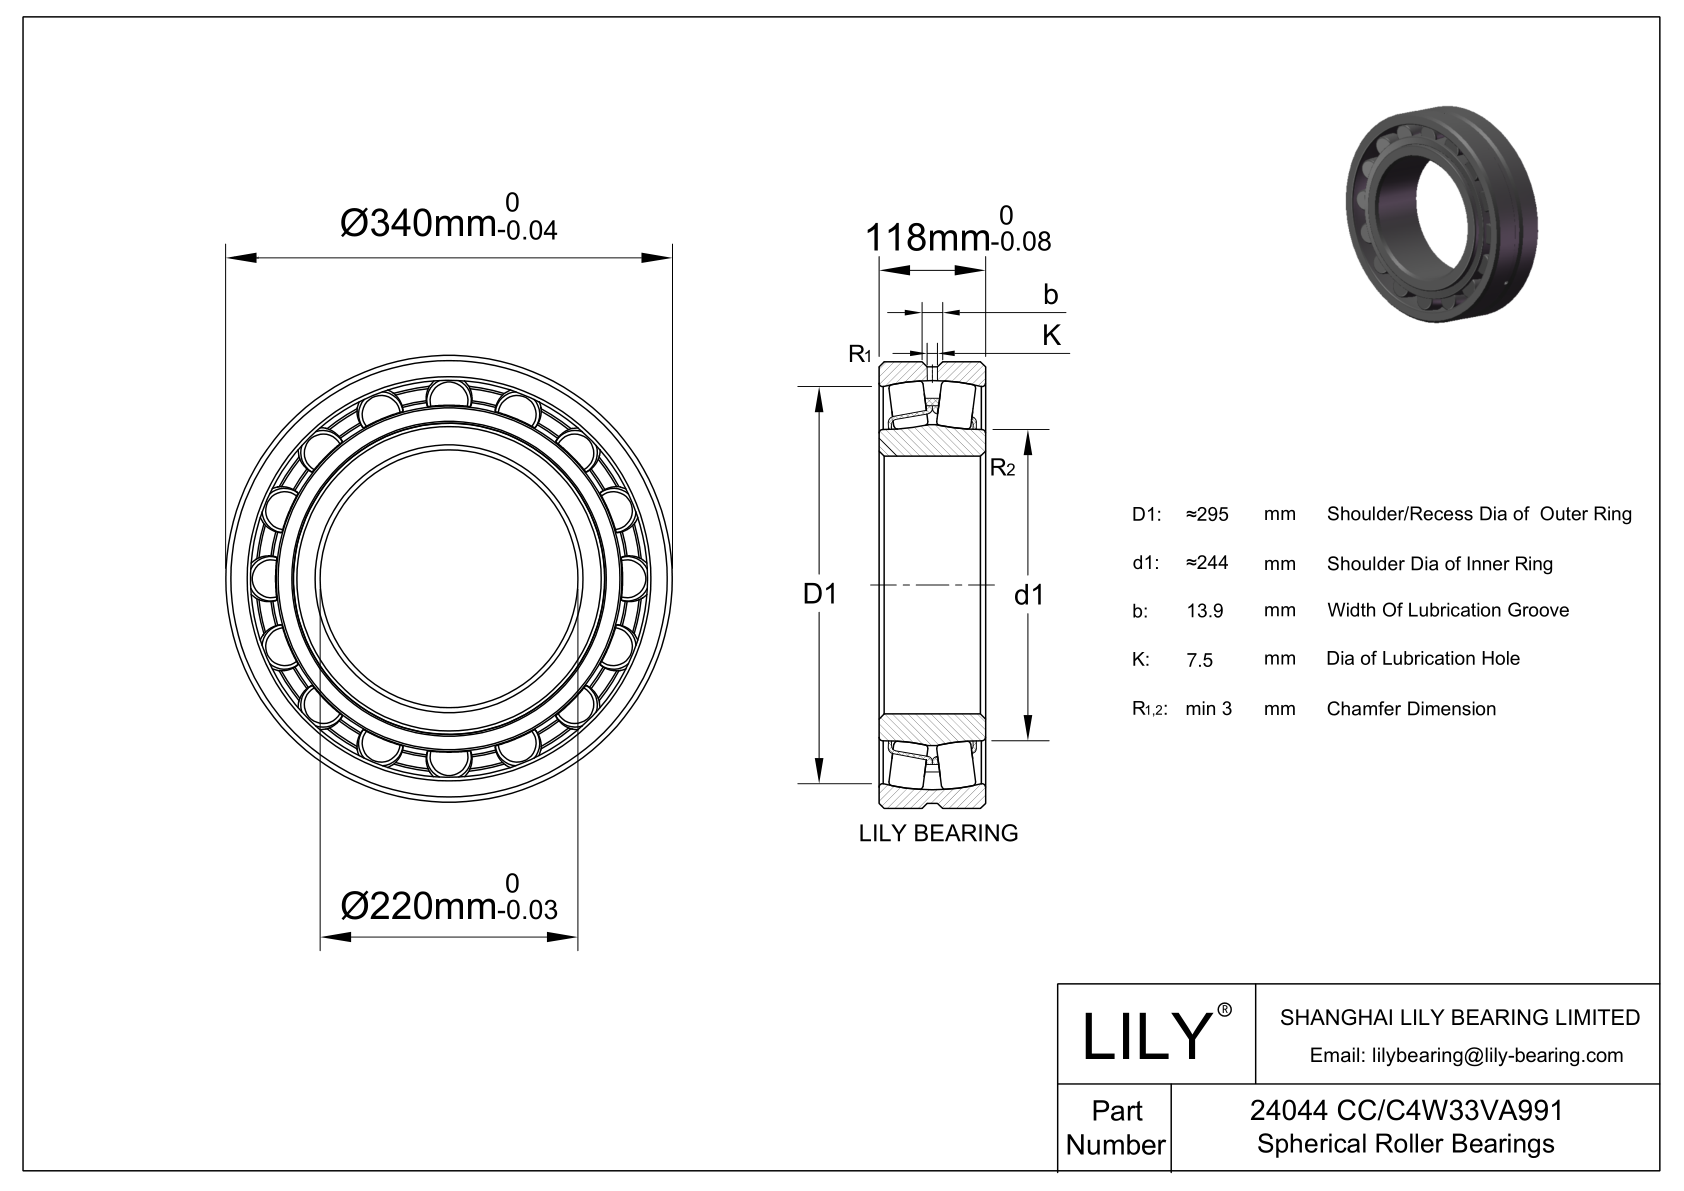 24044 CC/C4W33VA991 Double Row Spherical Roller Bearing cad drawing